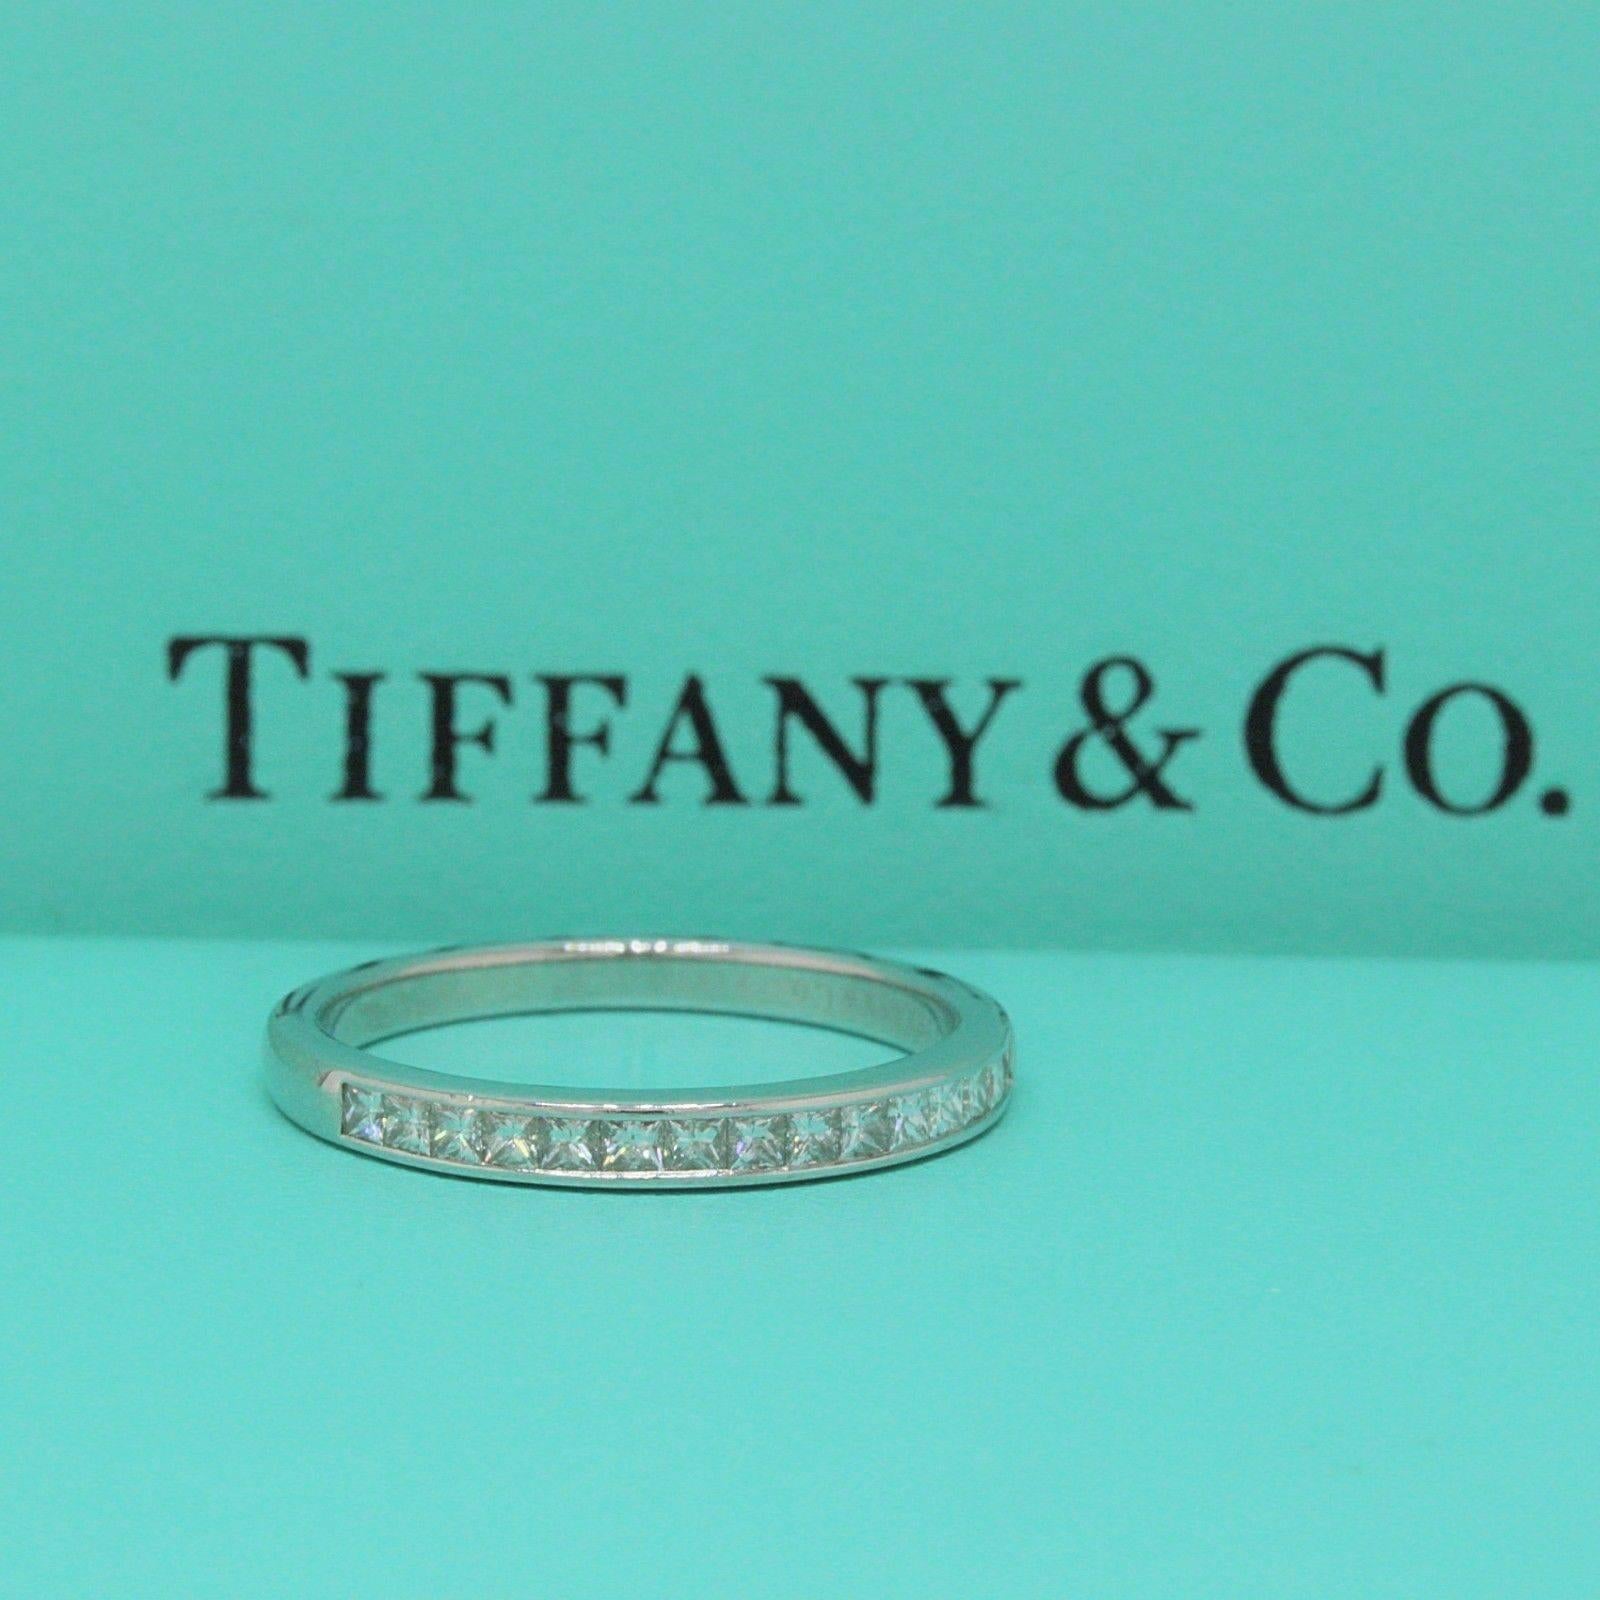 Tiffany & Co. Square Cut Diamond Wedding Band Ring in Platinum 0.39 tcw 2.6 MM For Sale 3